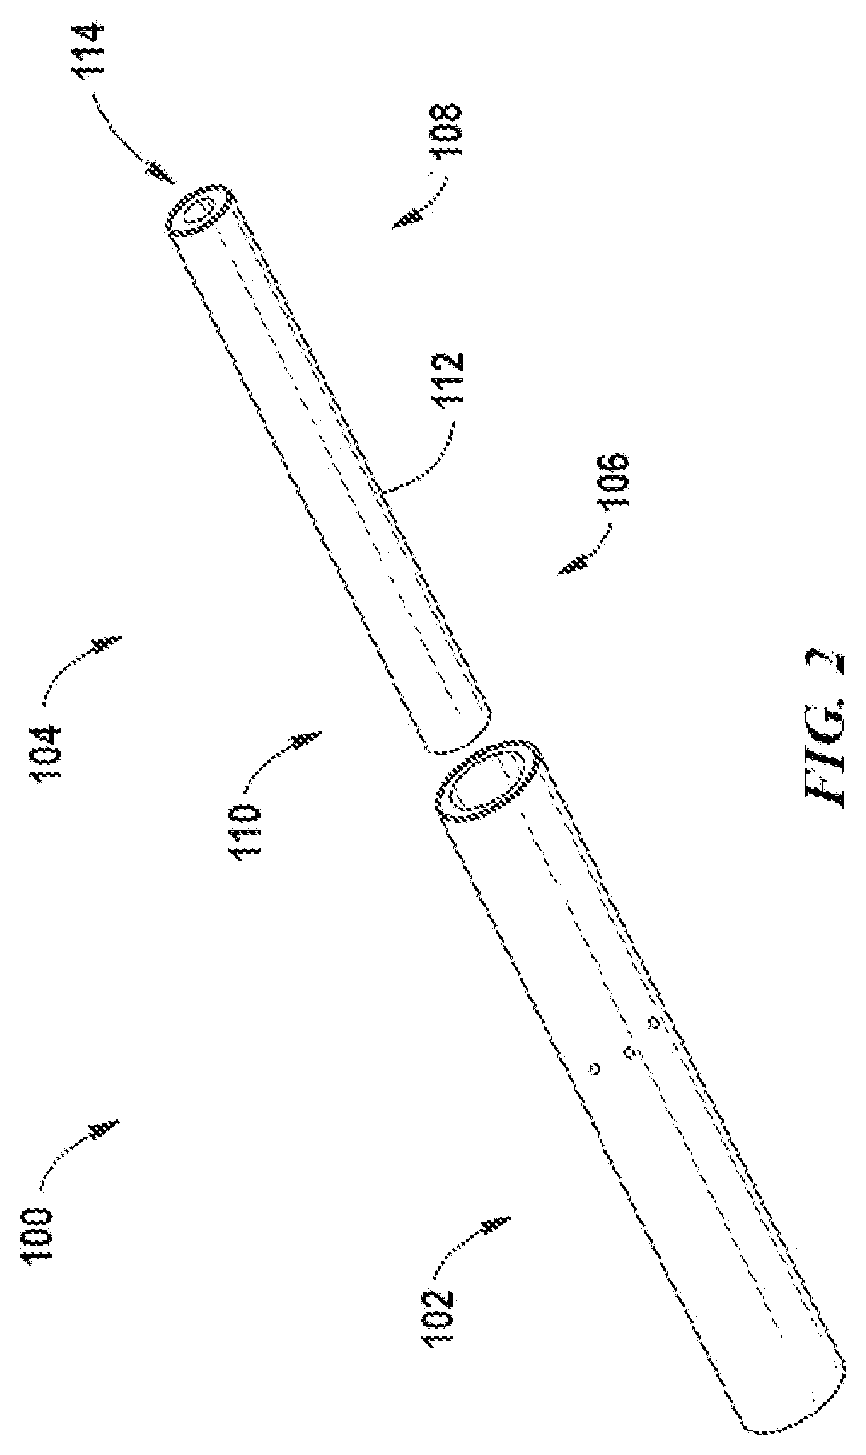 Extruded substrates for aerosol delivery devices